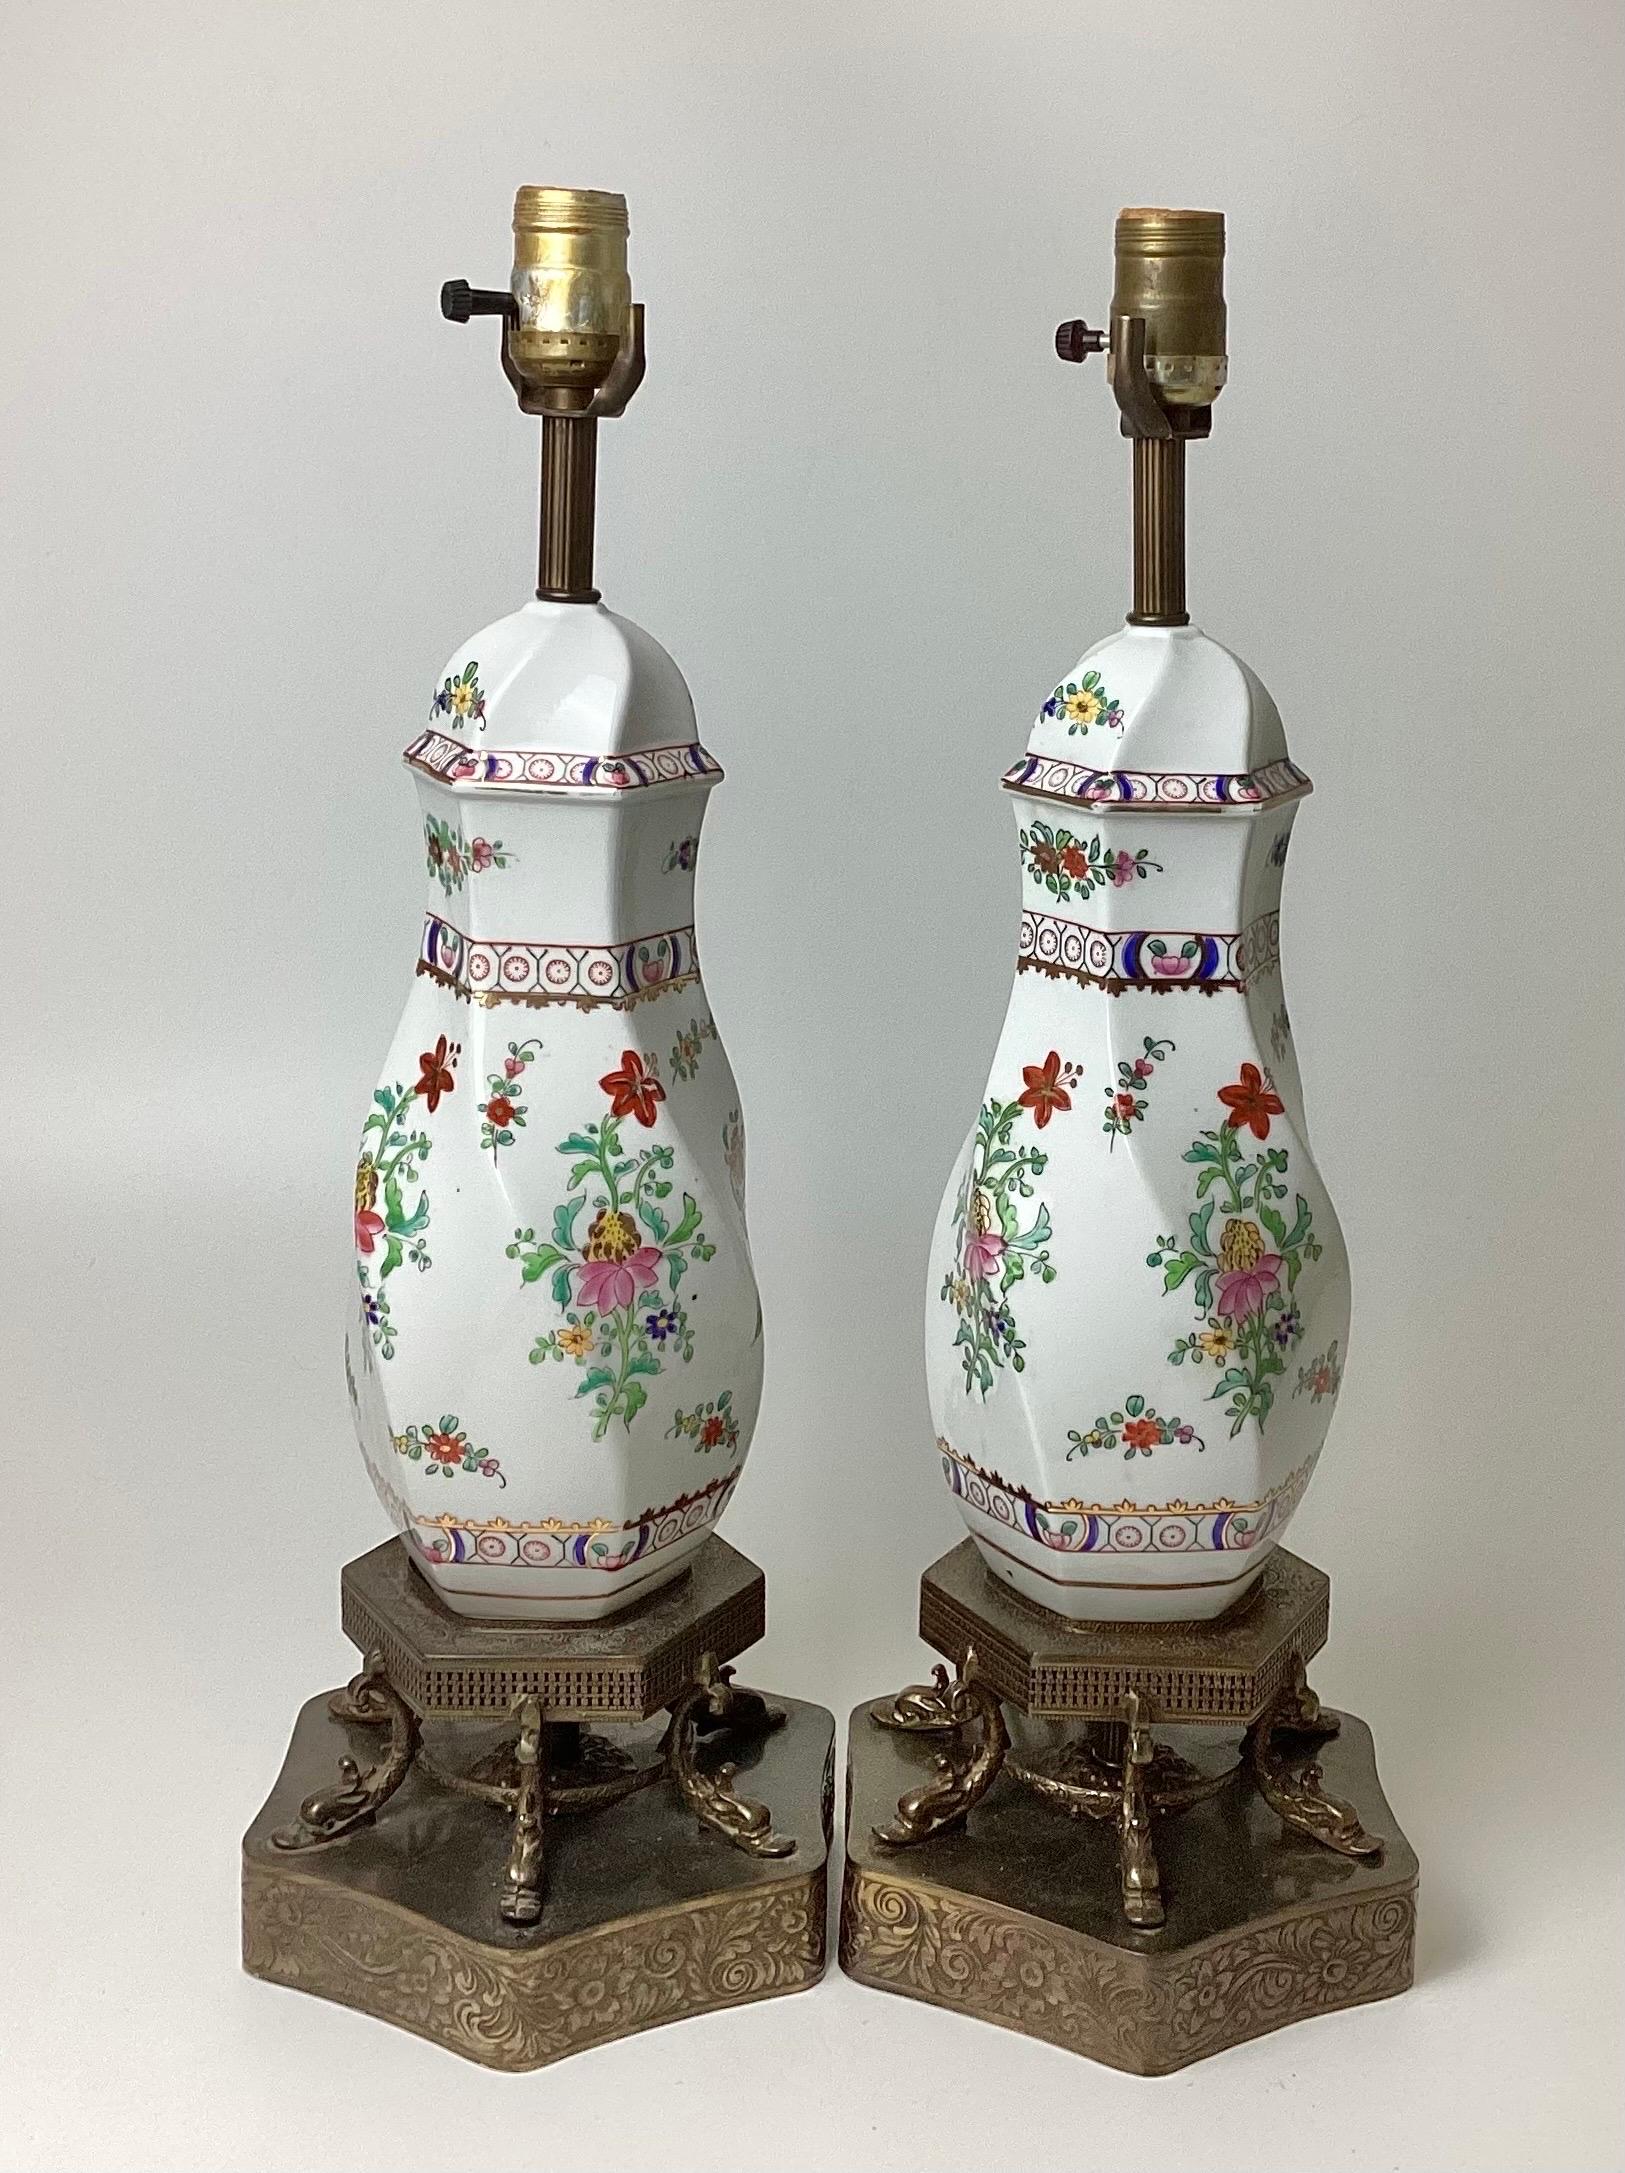 Pair of hand-painted porcelain lamps white with flowers on filagree brass dolphin bases. Stand 21